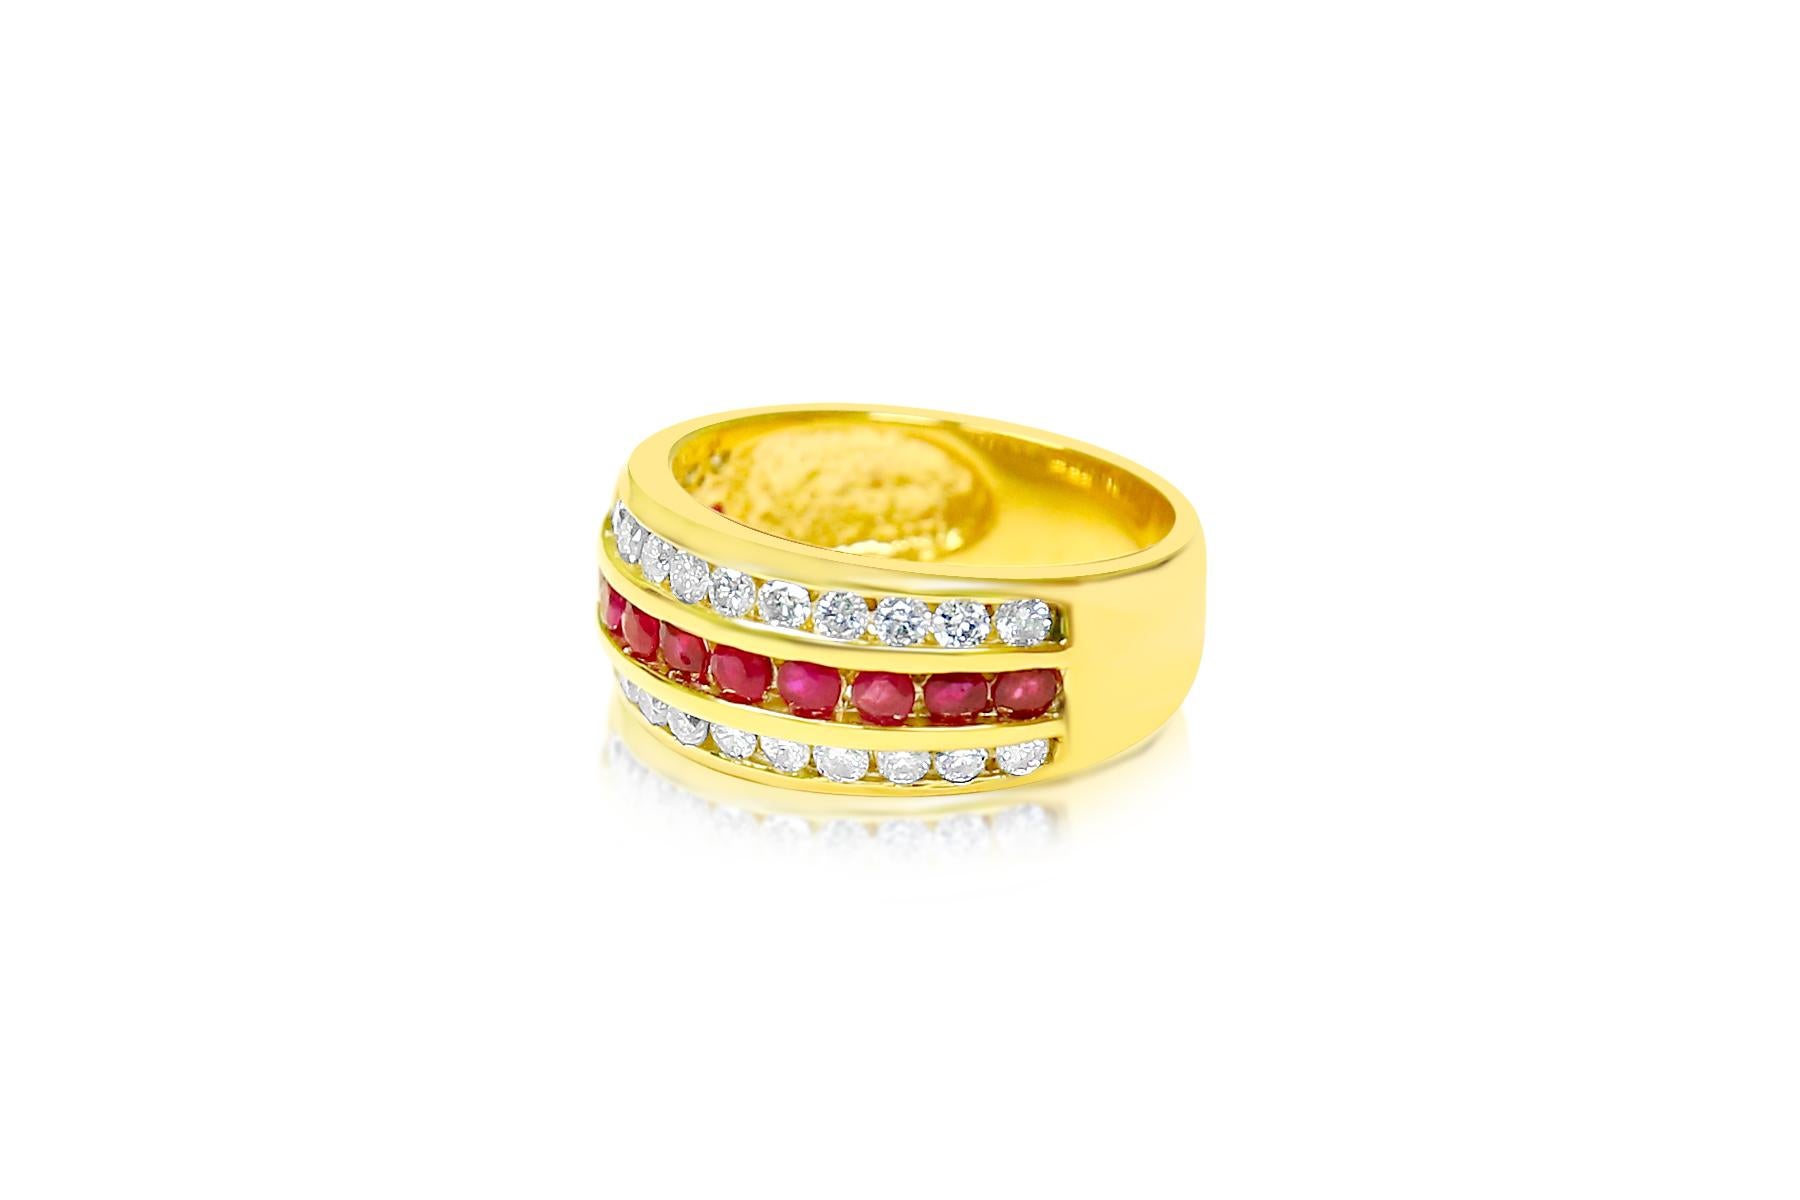 Contemporary 14k Yellow Gold, 2.25ct Diamond and Burma Ruby Ring. For Sale